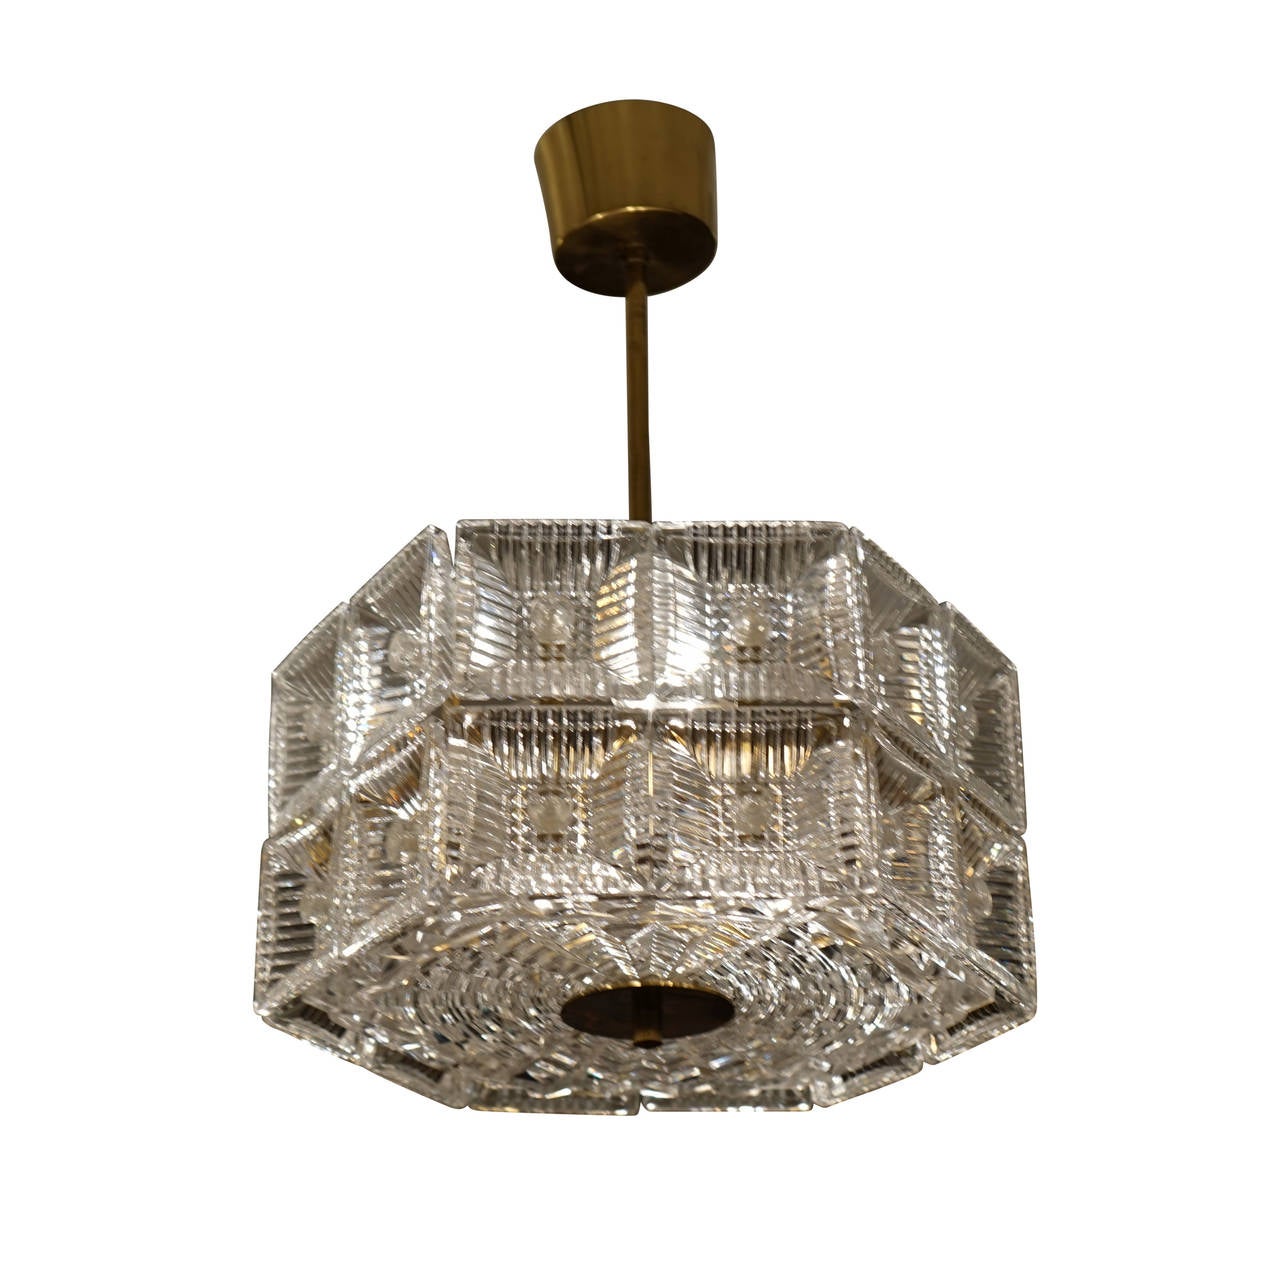 Crisp, bright and quite reflective, this cubist inspired light fixture features 24 inverted pressed glass prisms.  A circular pattern on the base differentiate this piece from the following listing which is otherwise identical.